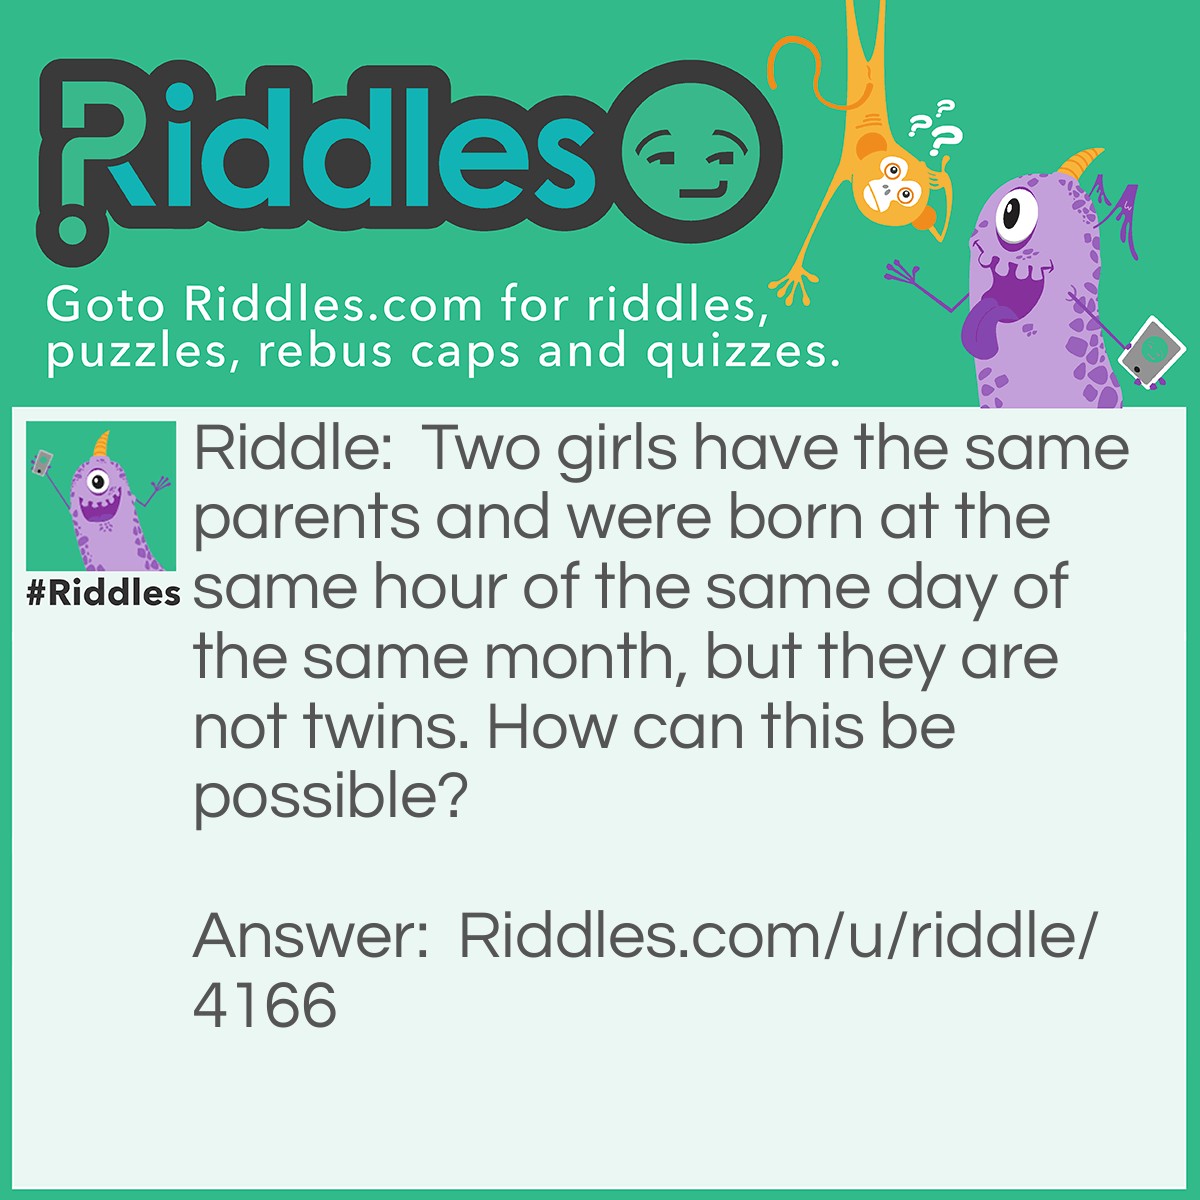 Riddle: Two girls have the same parents and were born at the same hour of the same day of the same month, but they are not twins. How can this be possible? Answer: They were not born in the same year.